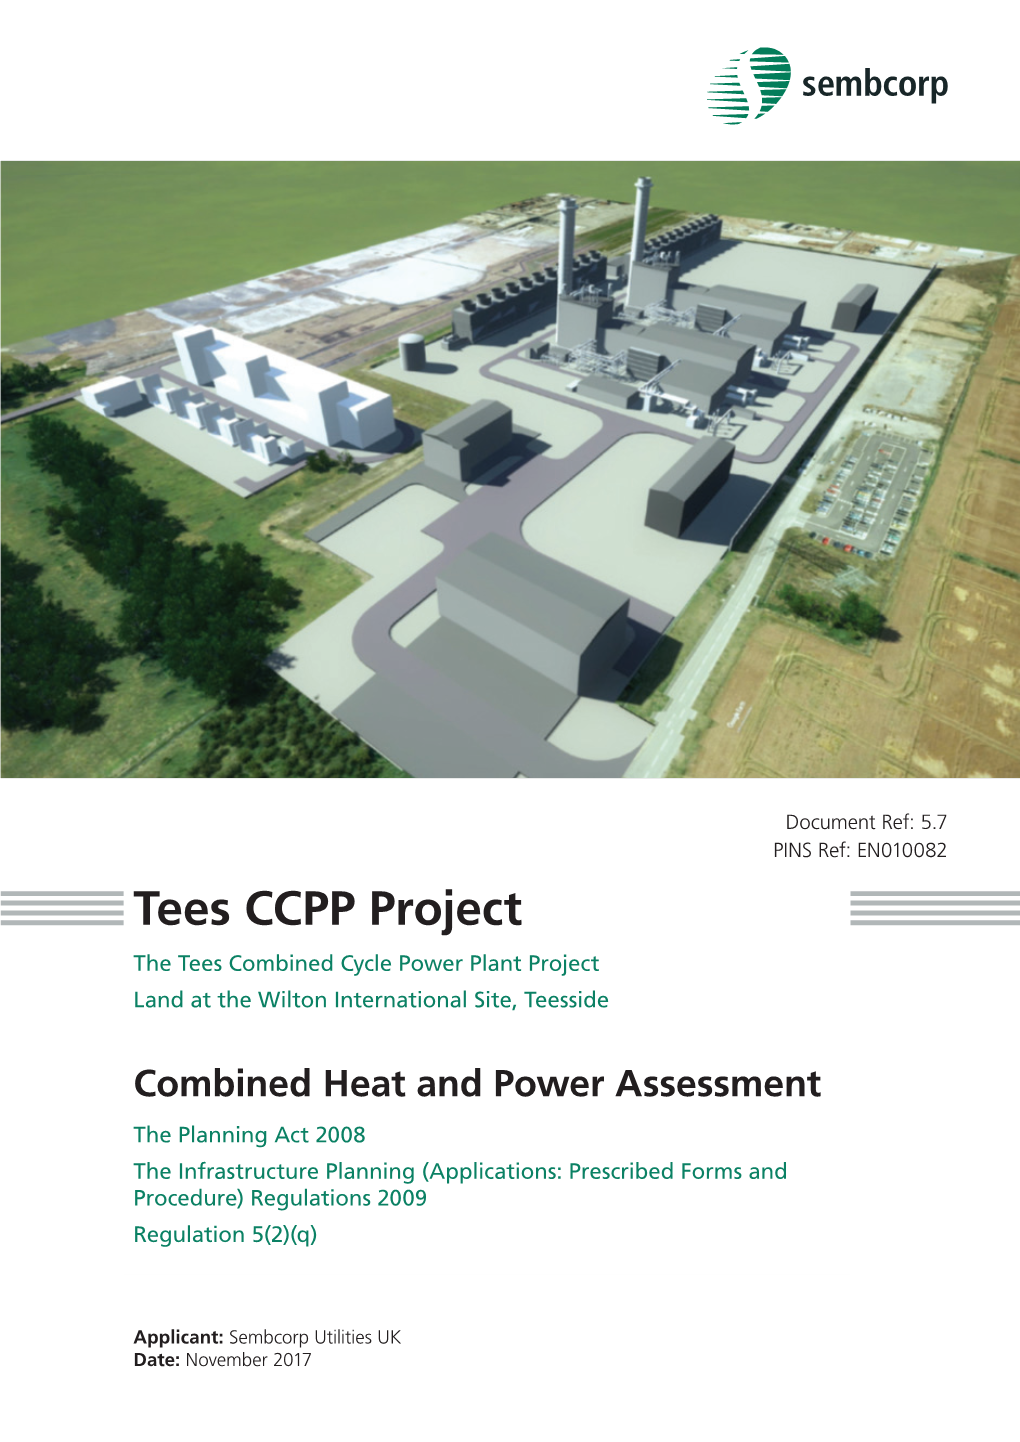 Tees CCPP Project the Tees Combined Cycle Power Plant Project Land at the Wilton International Site, Teesside